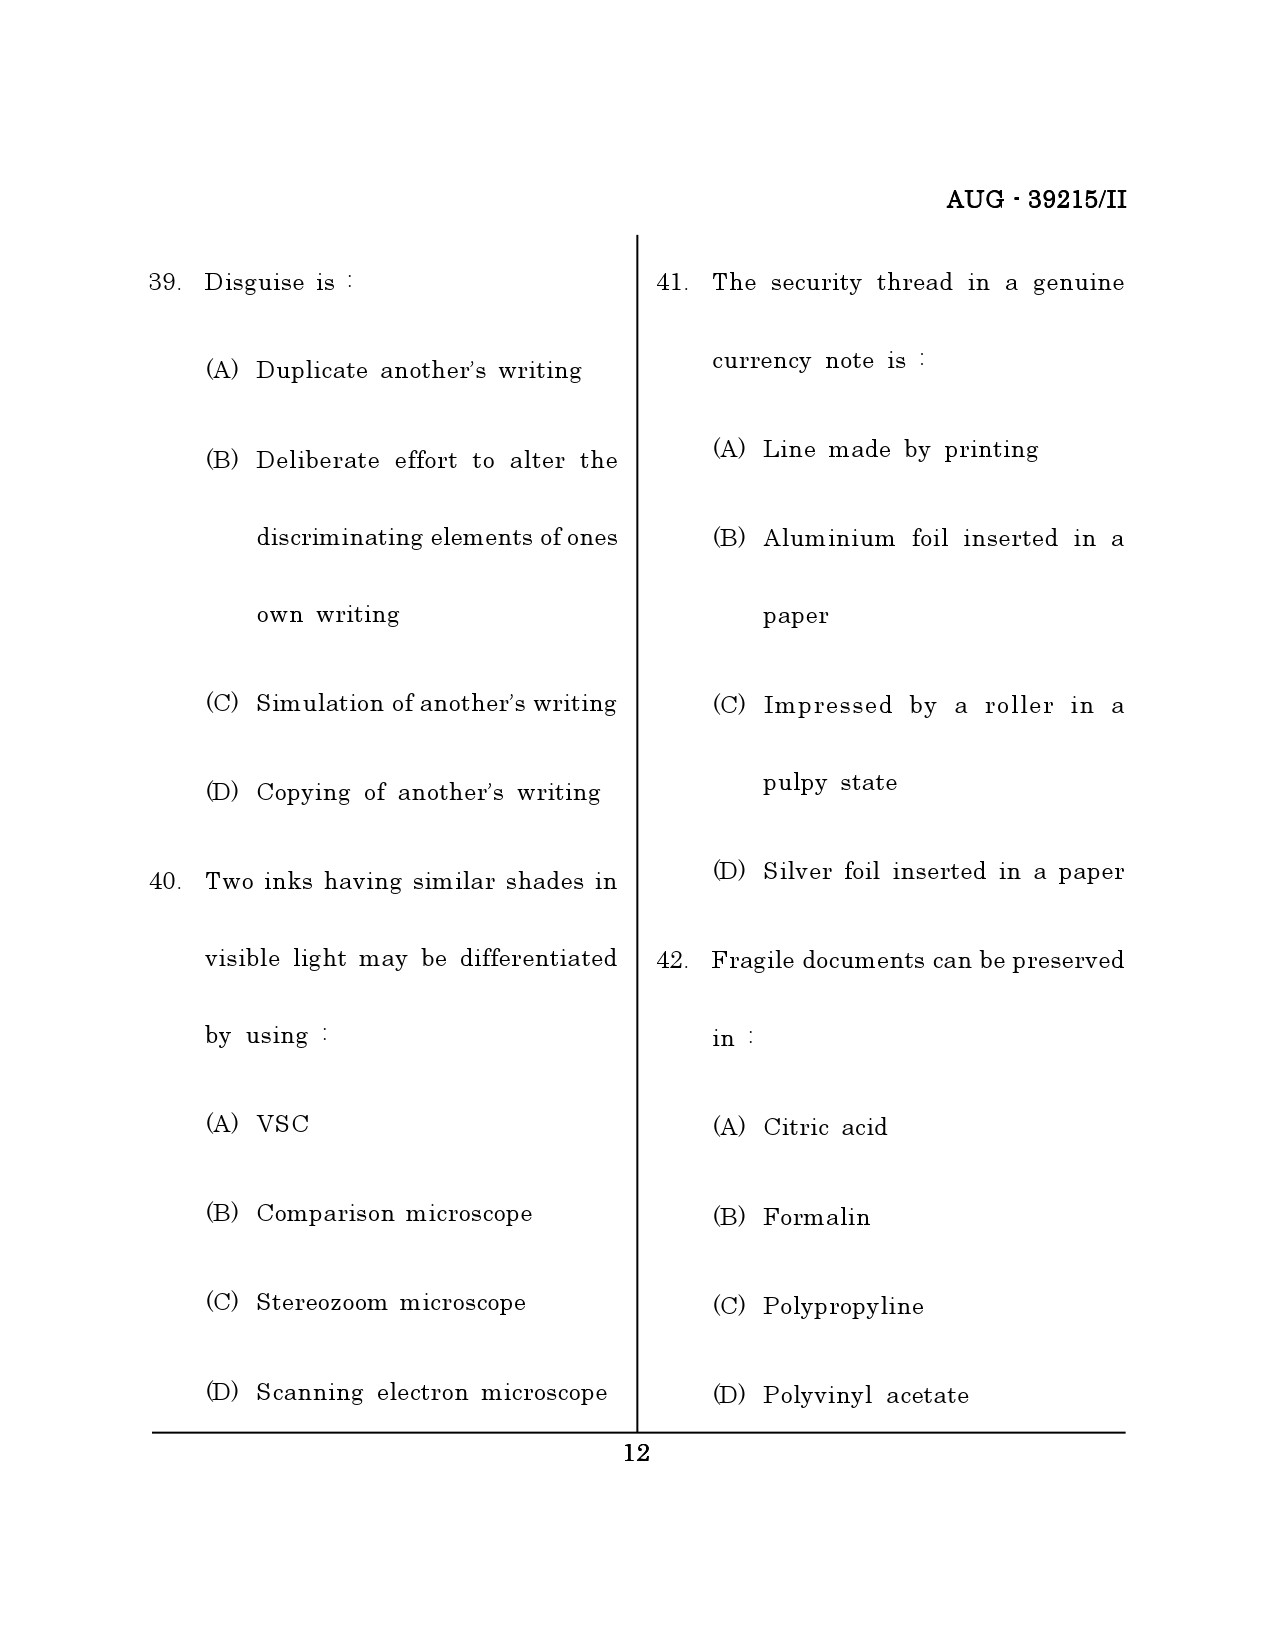 Maharashtra SET Forensic Science Question Paper II August 2015 11